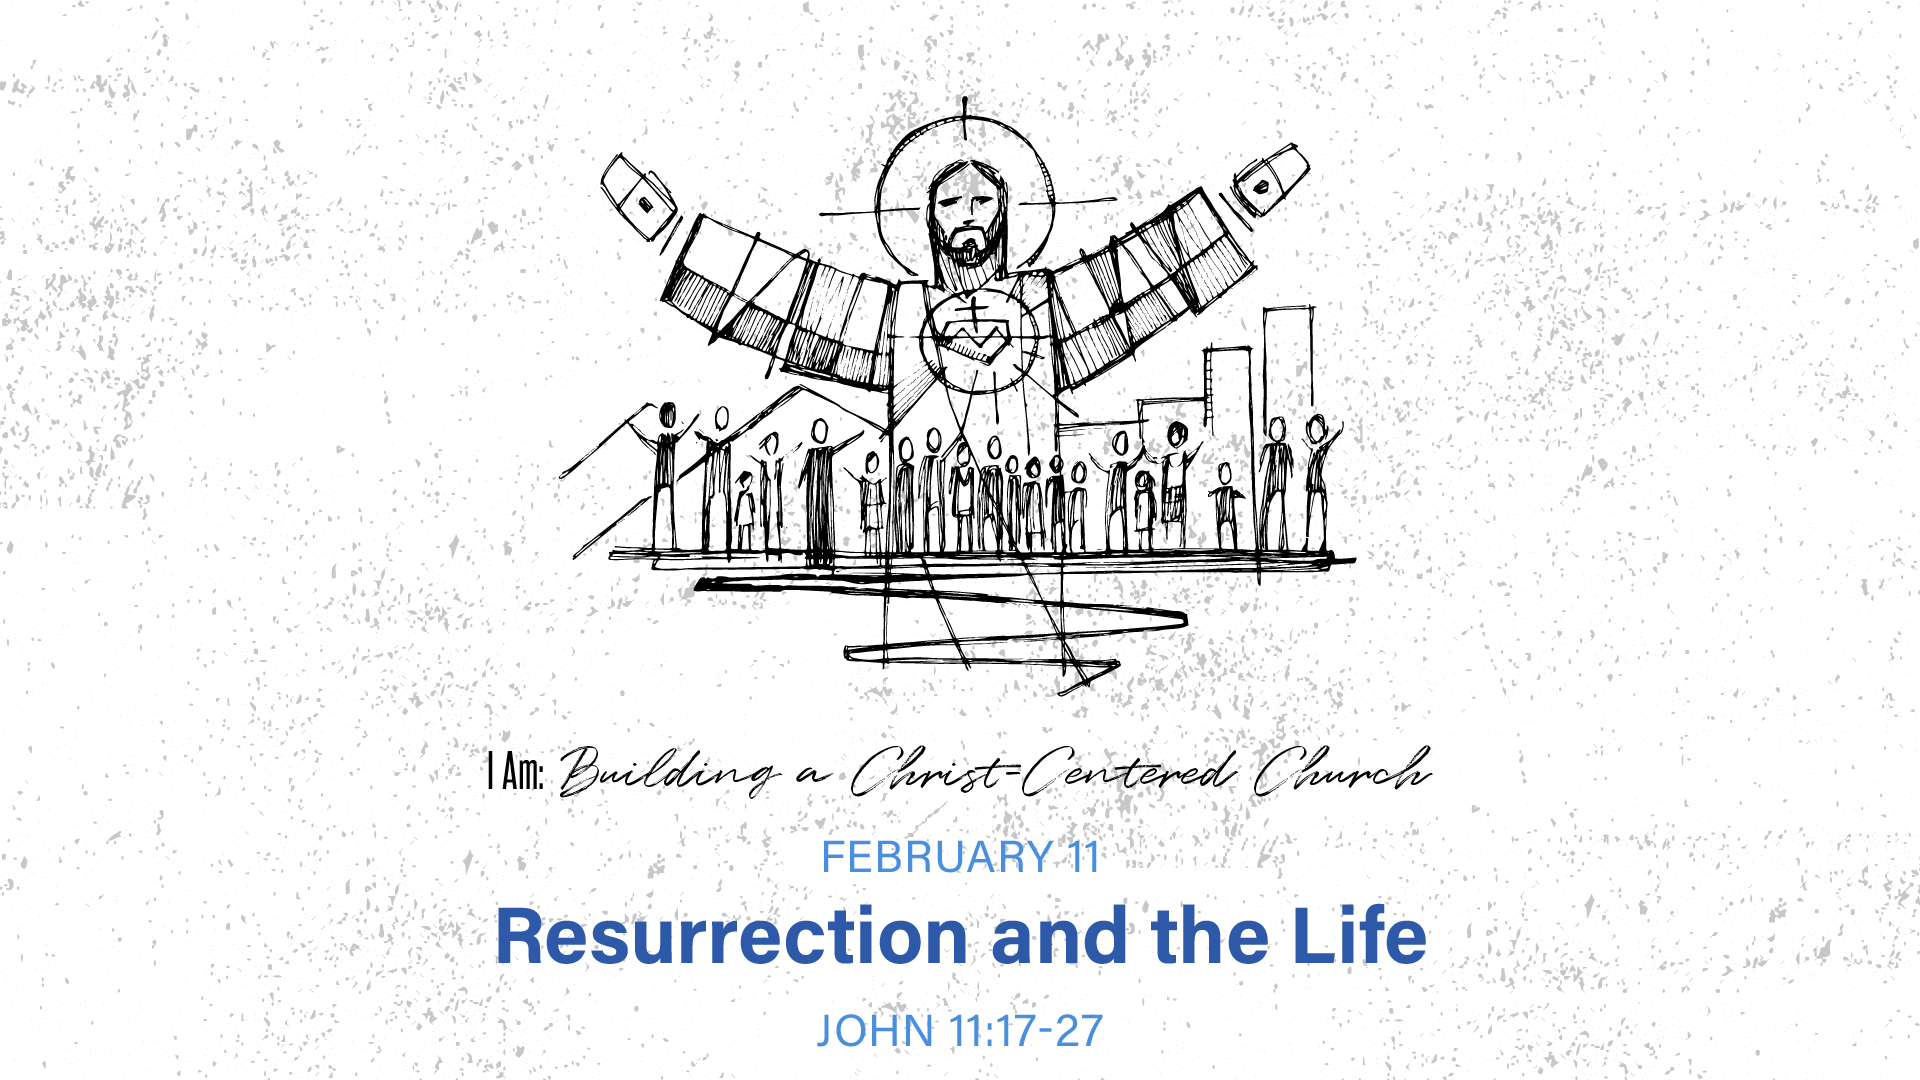 I Am: Building a Christ-Centered Church: Resurrection and the Life